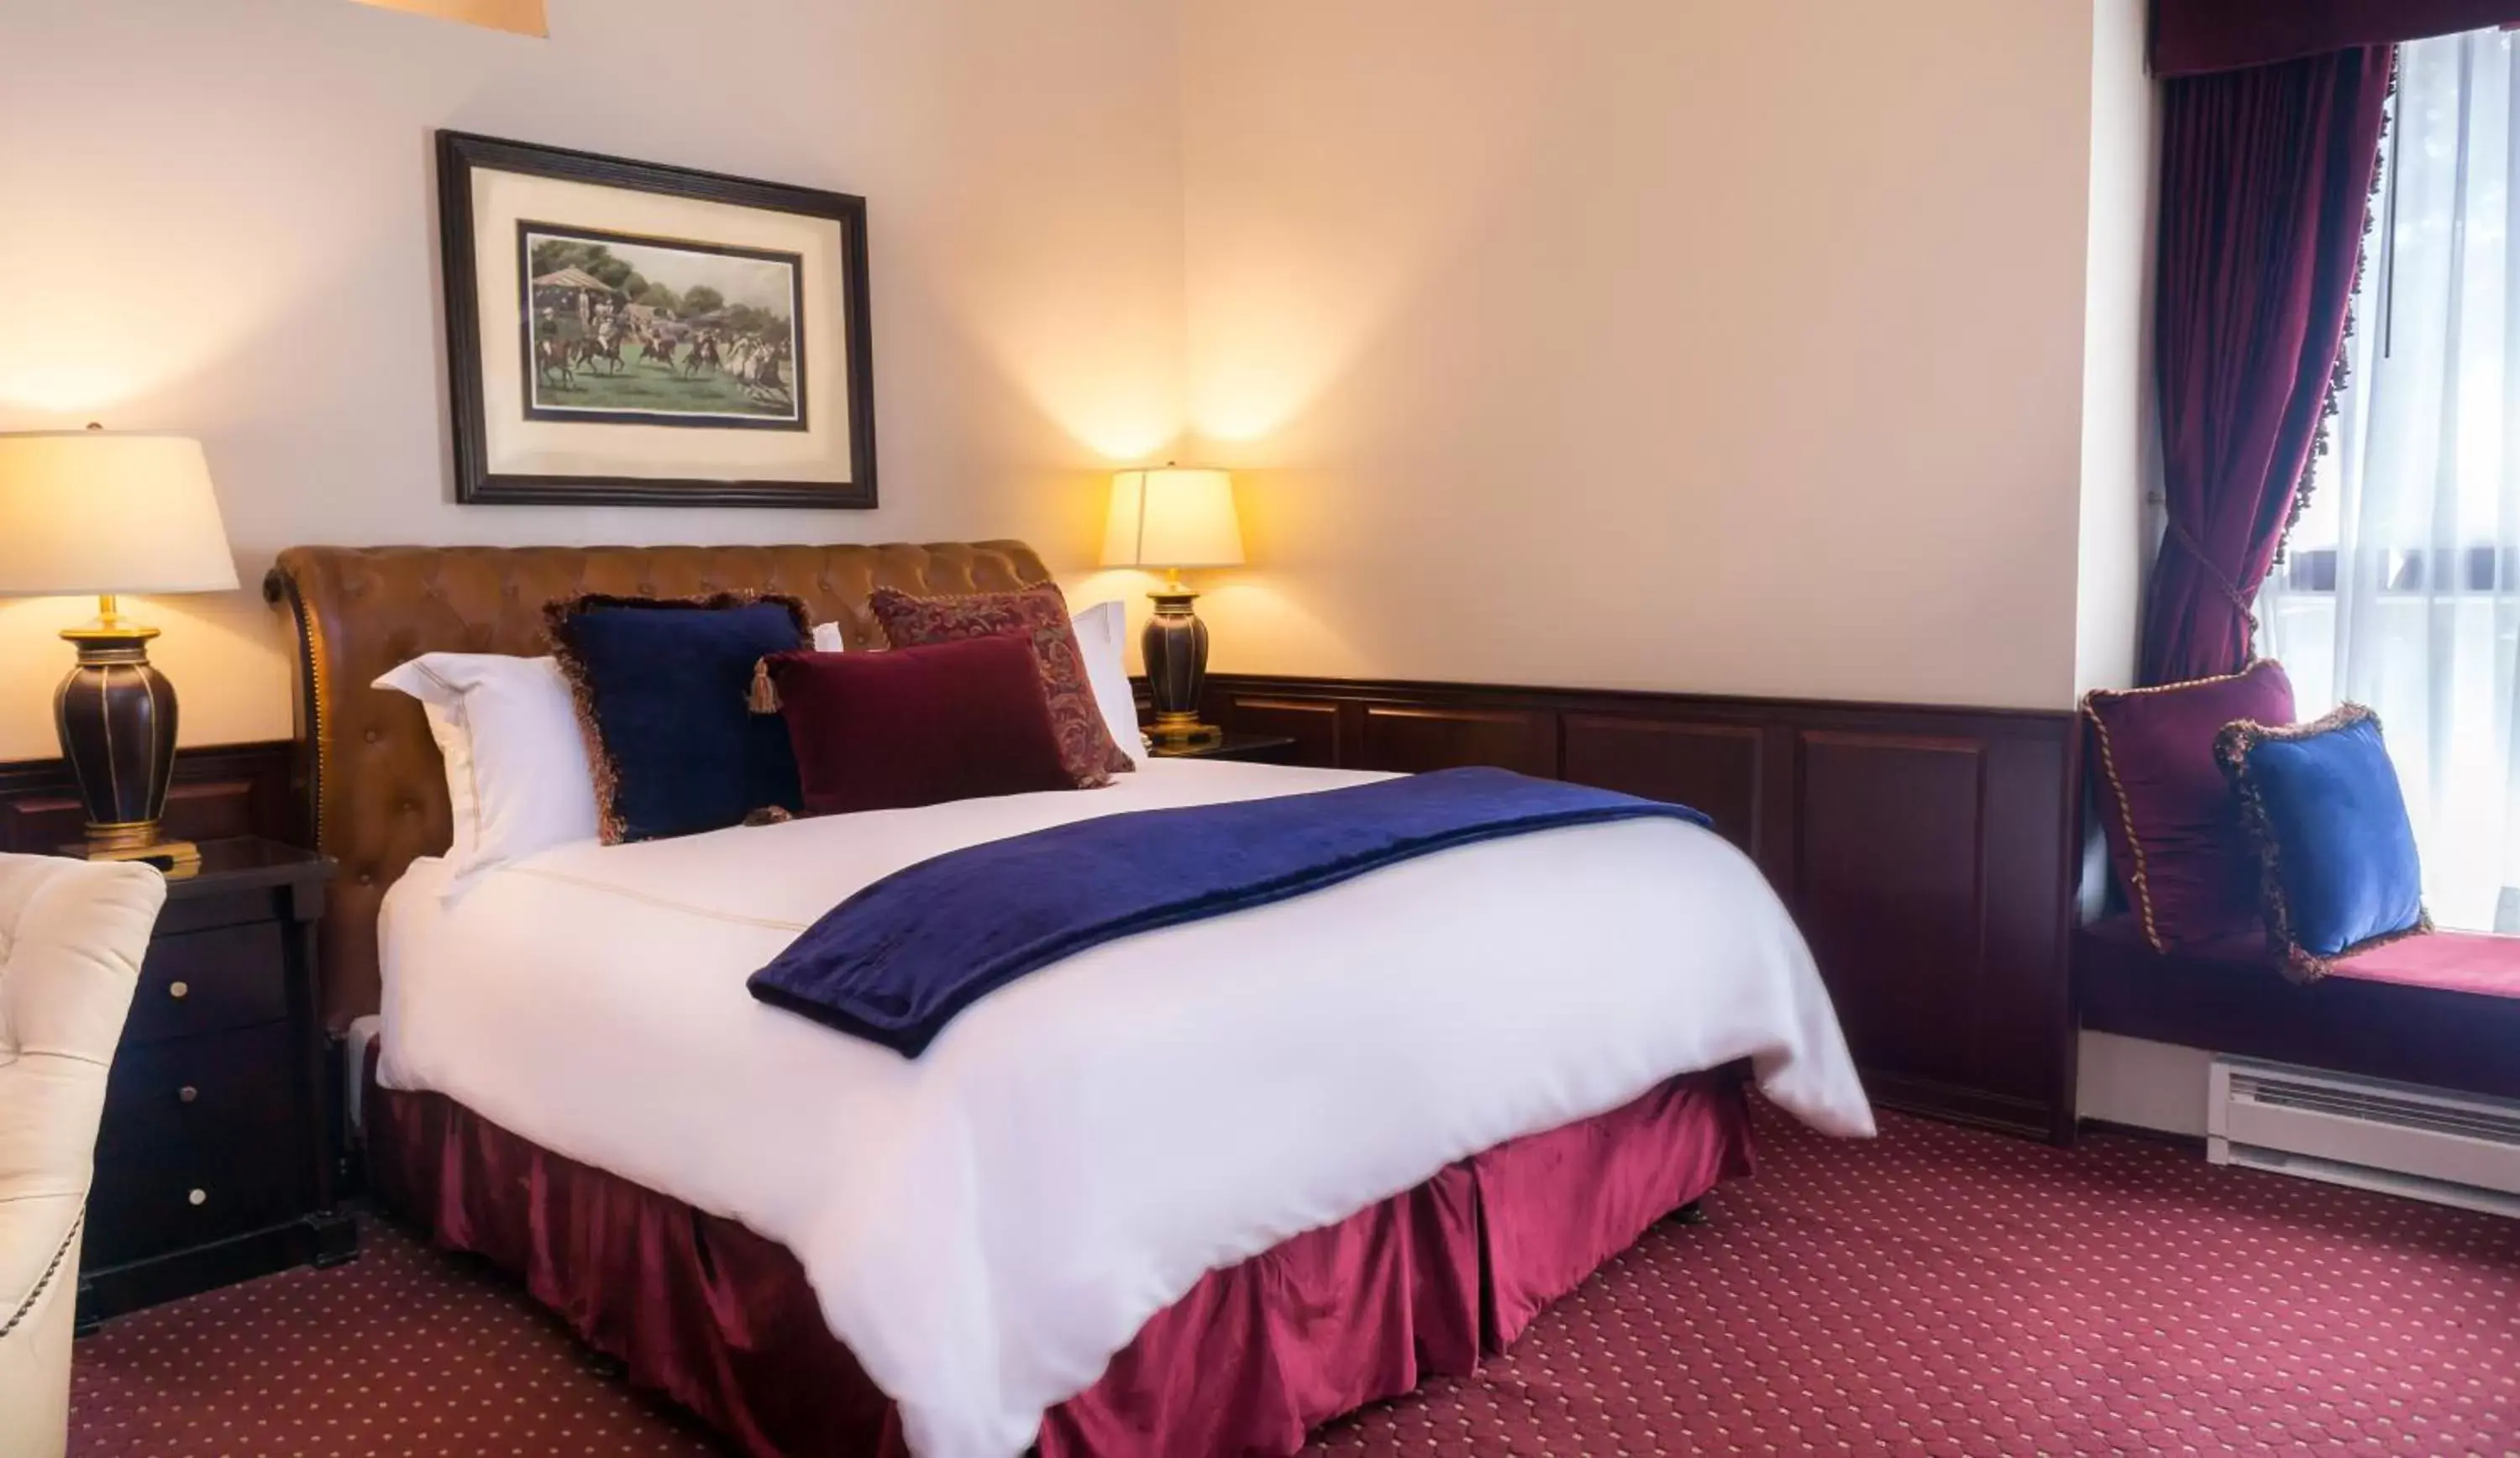 Day, Bed in Carriage House Inn